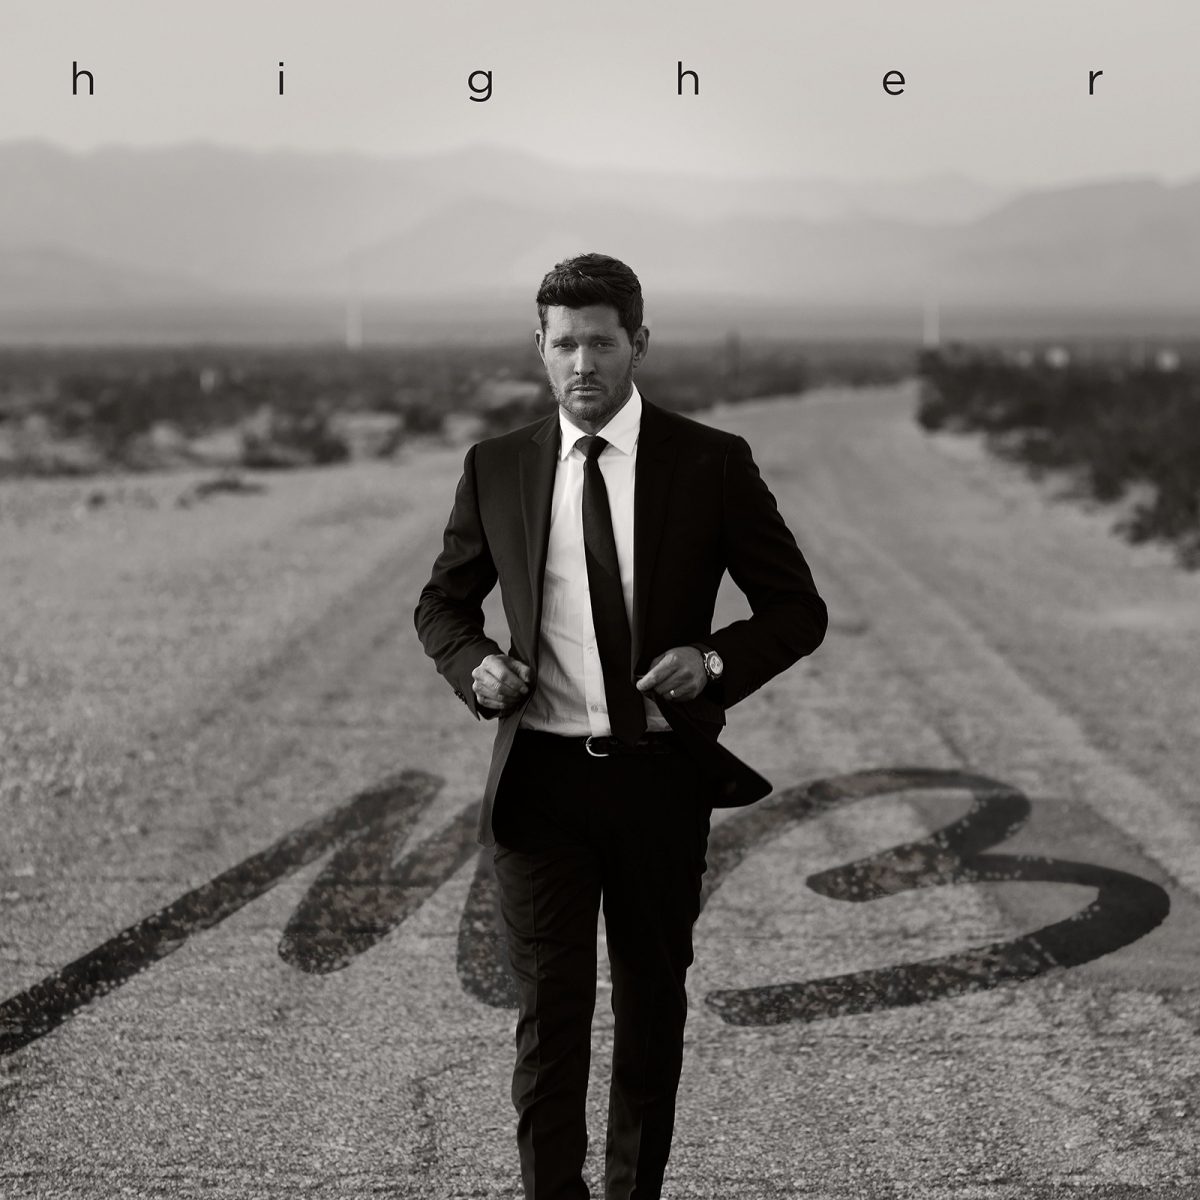 Michael Bublé Expands Higher With Deluxe Edition Out Now On All Streaming Platforms